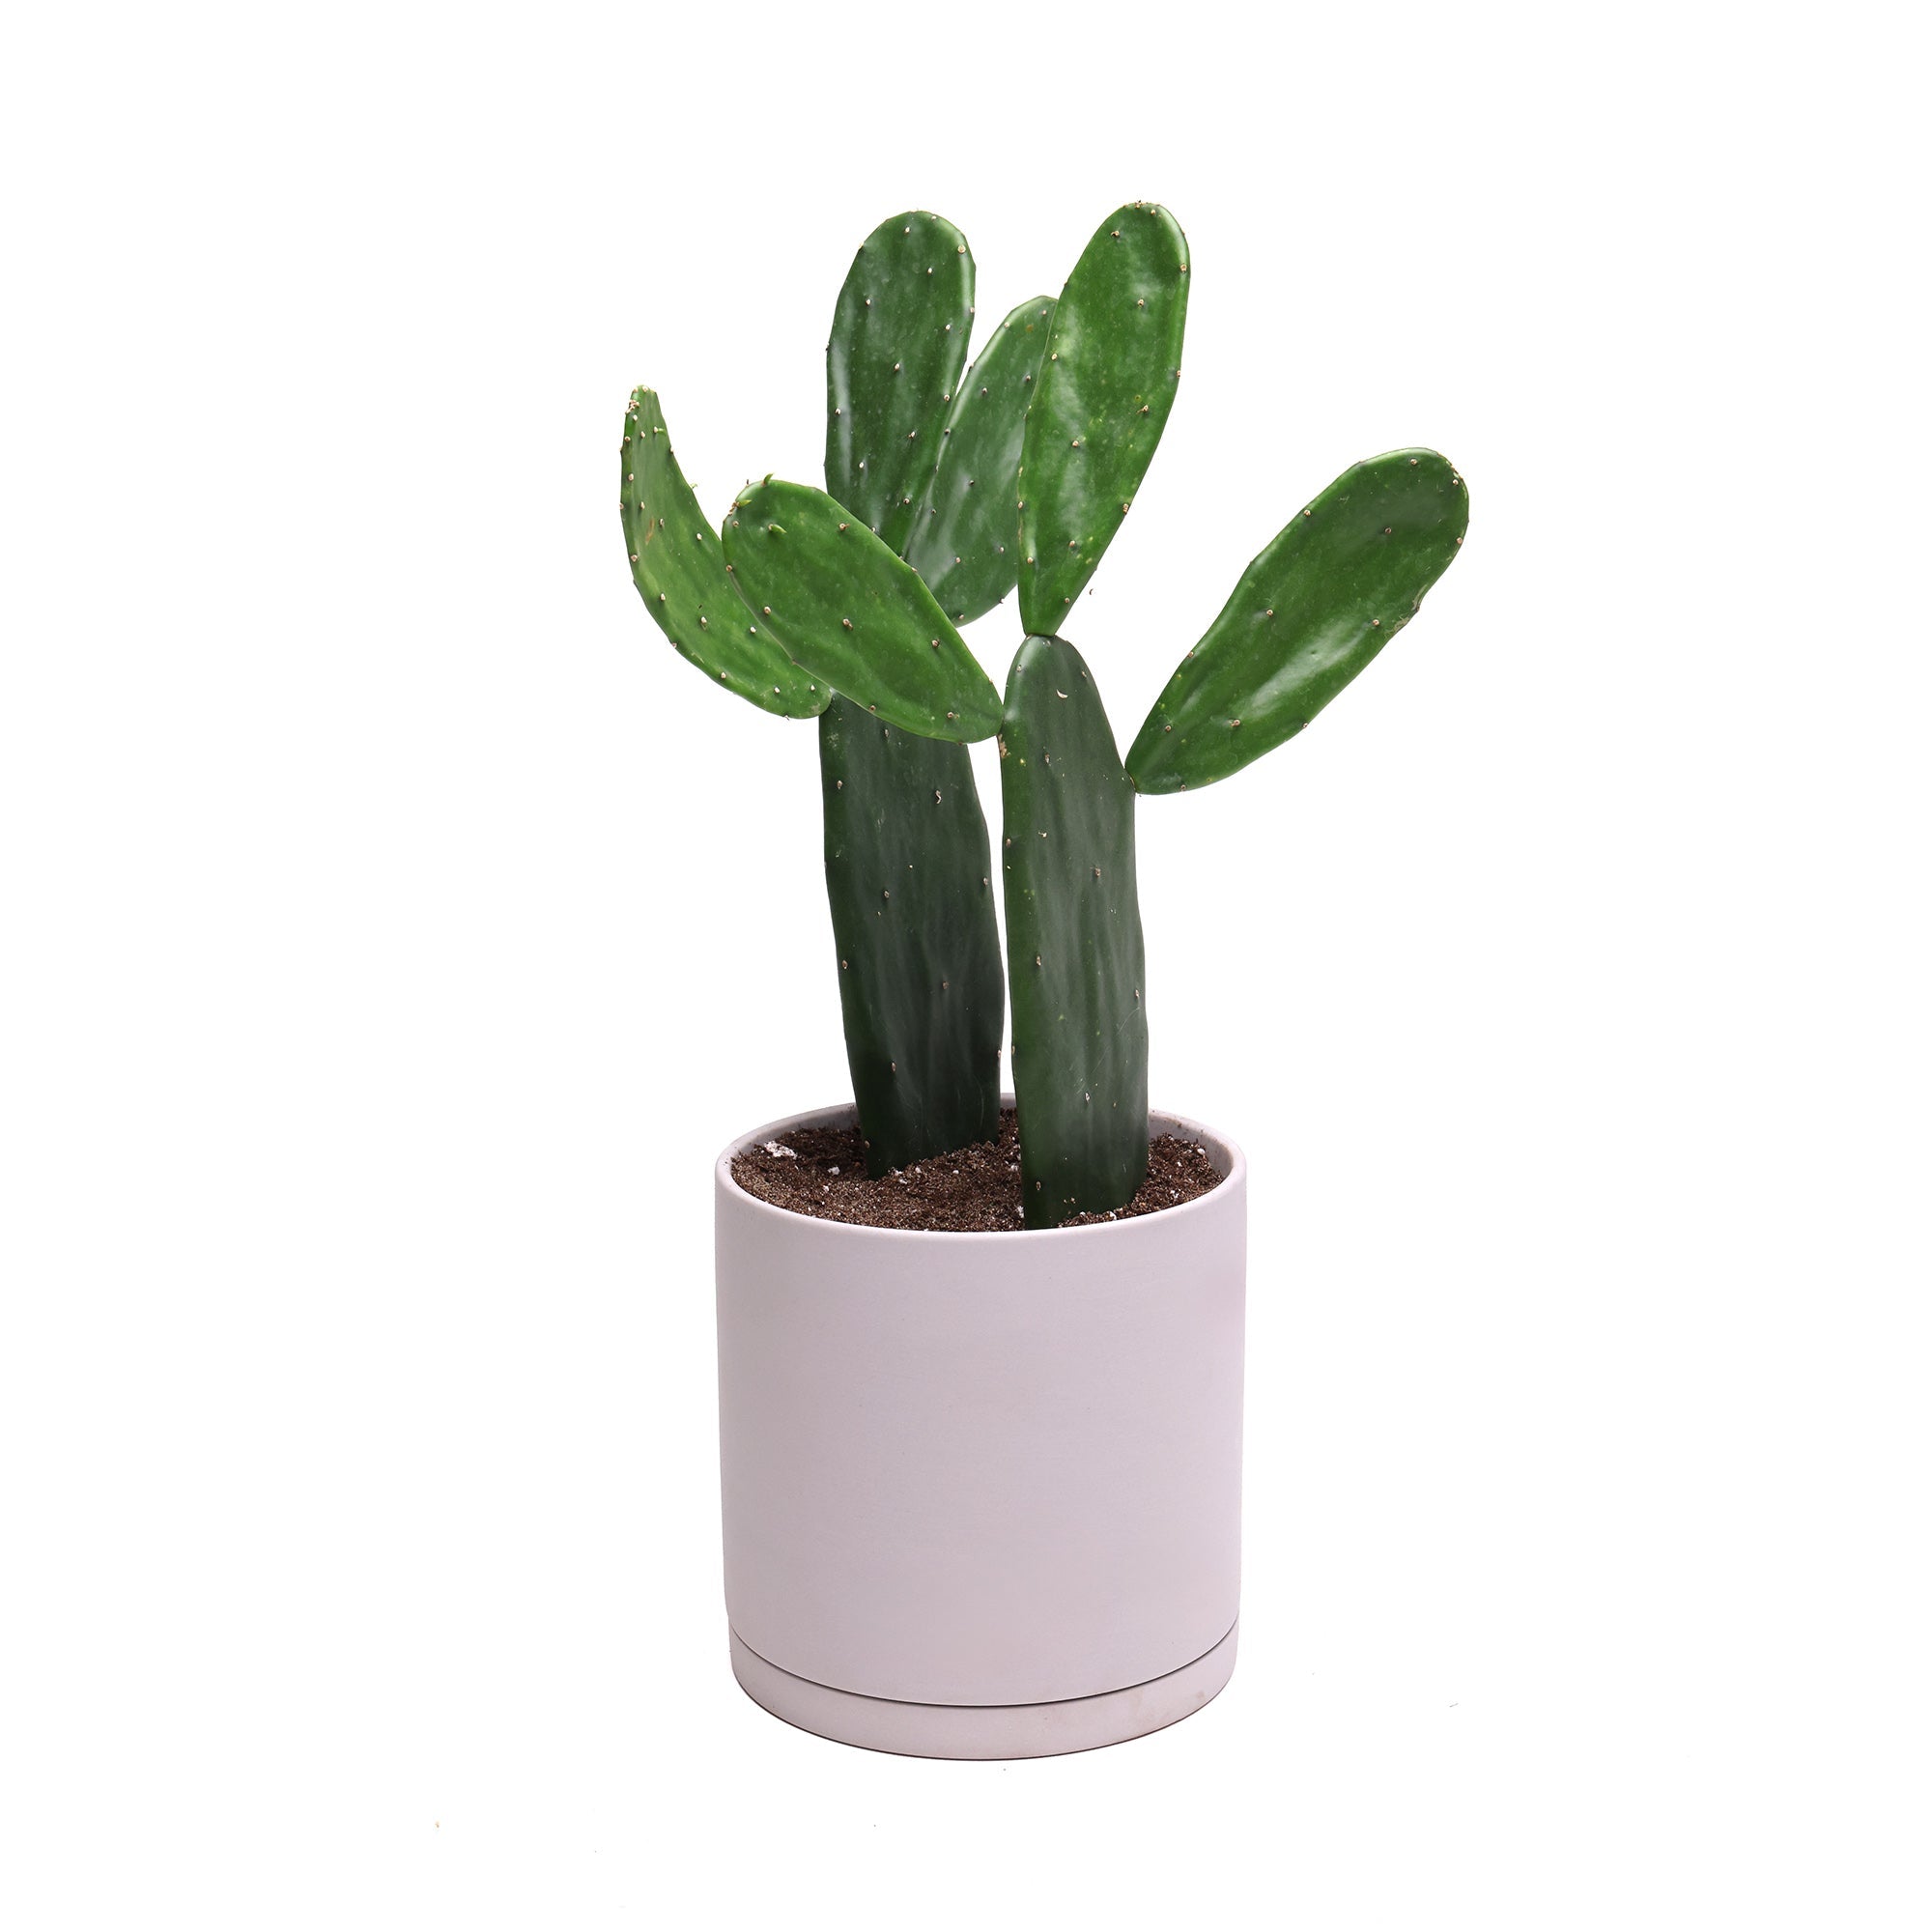 A low-maintenance Potted Opuntia 6” in Dojo with several green, paddle-like segments growing from a small white pot against a clean white background.